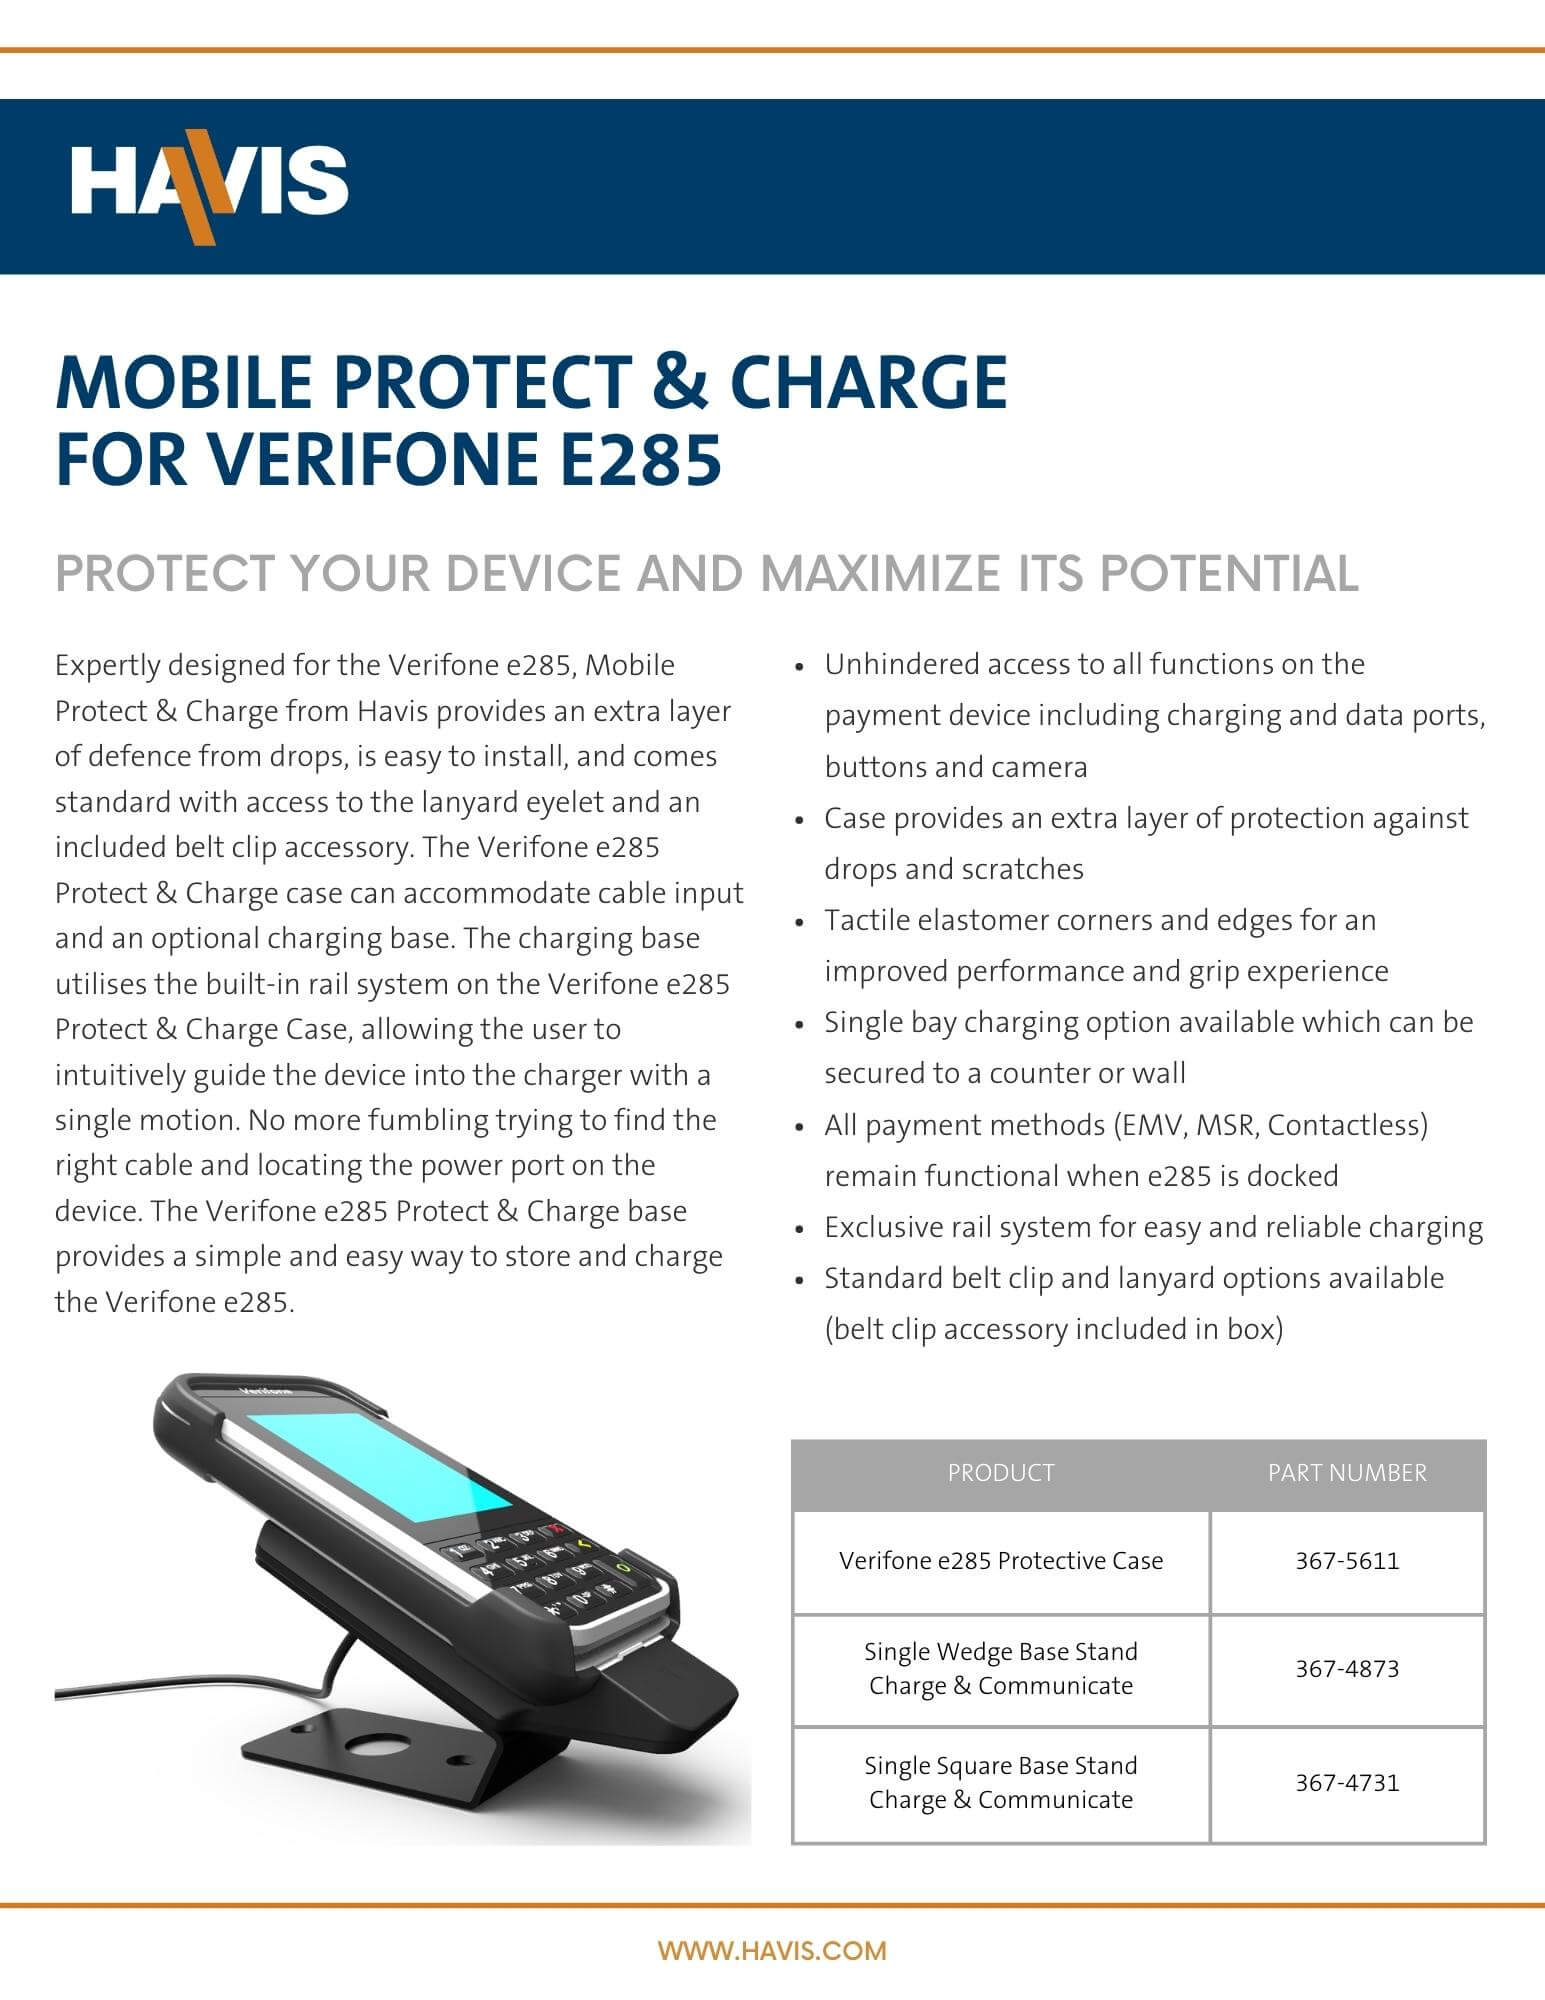 Mobile Protect & Charge for Verifone e285 Datasheet